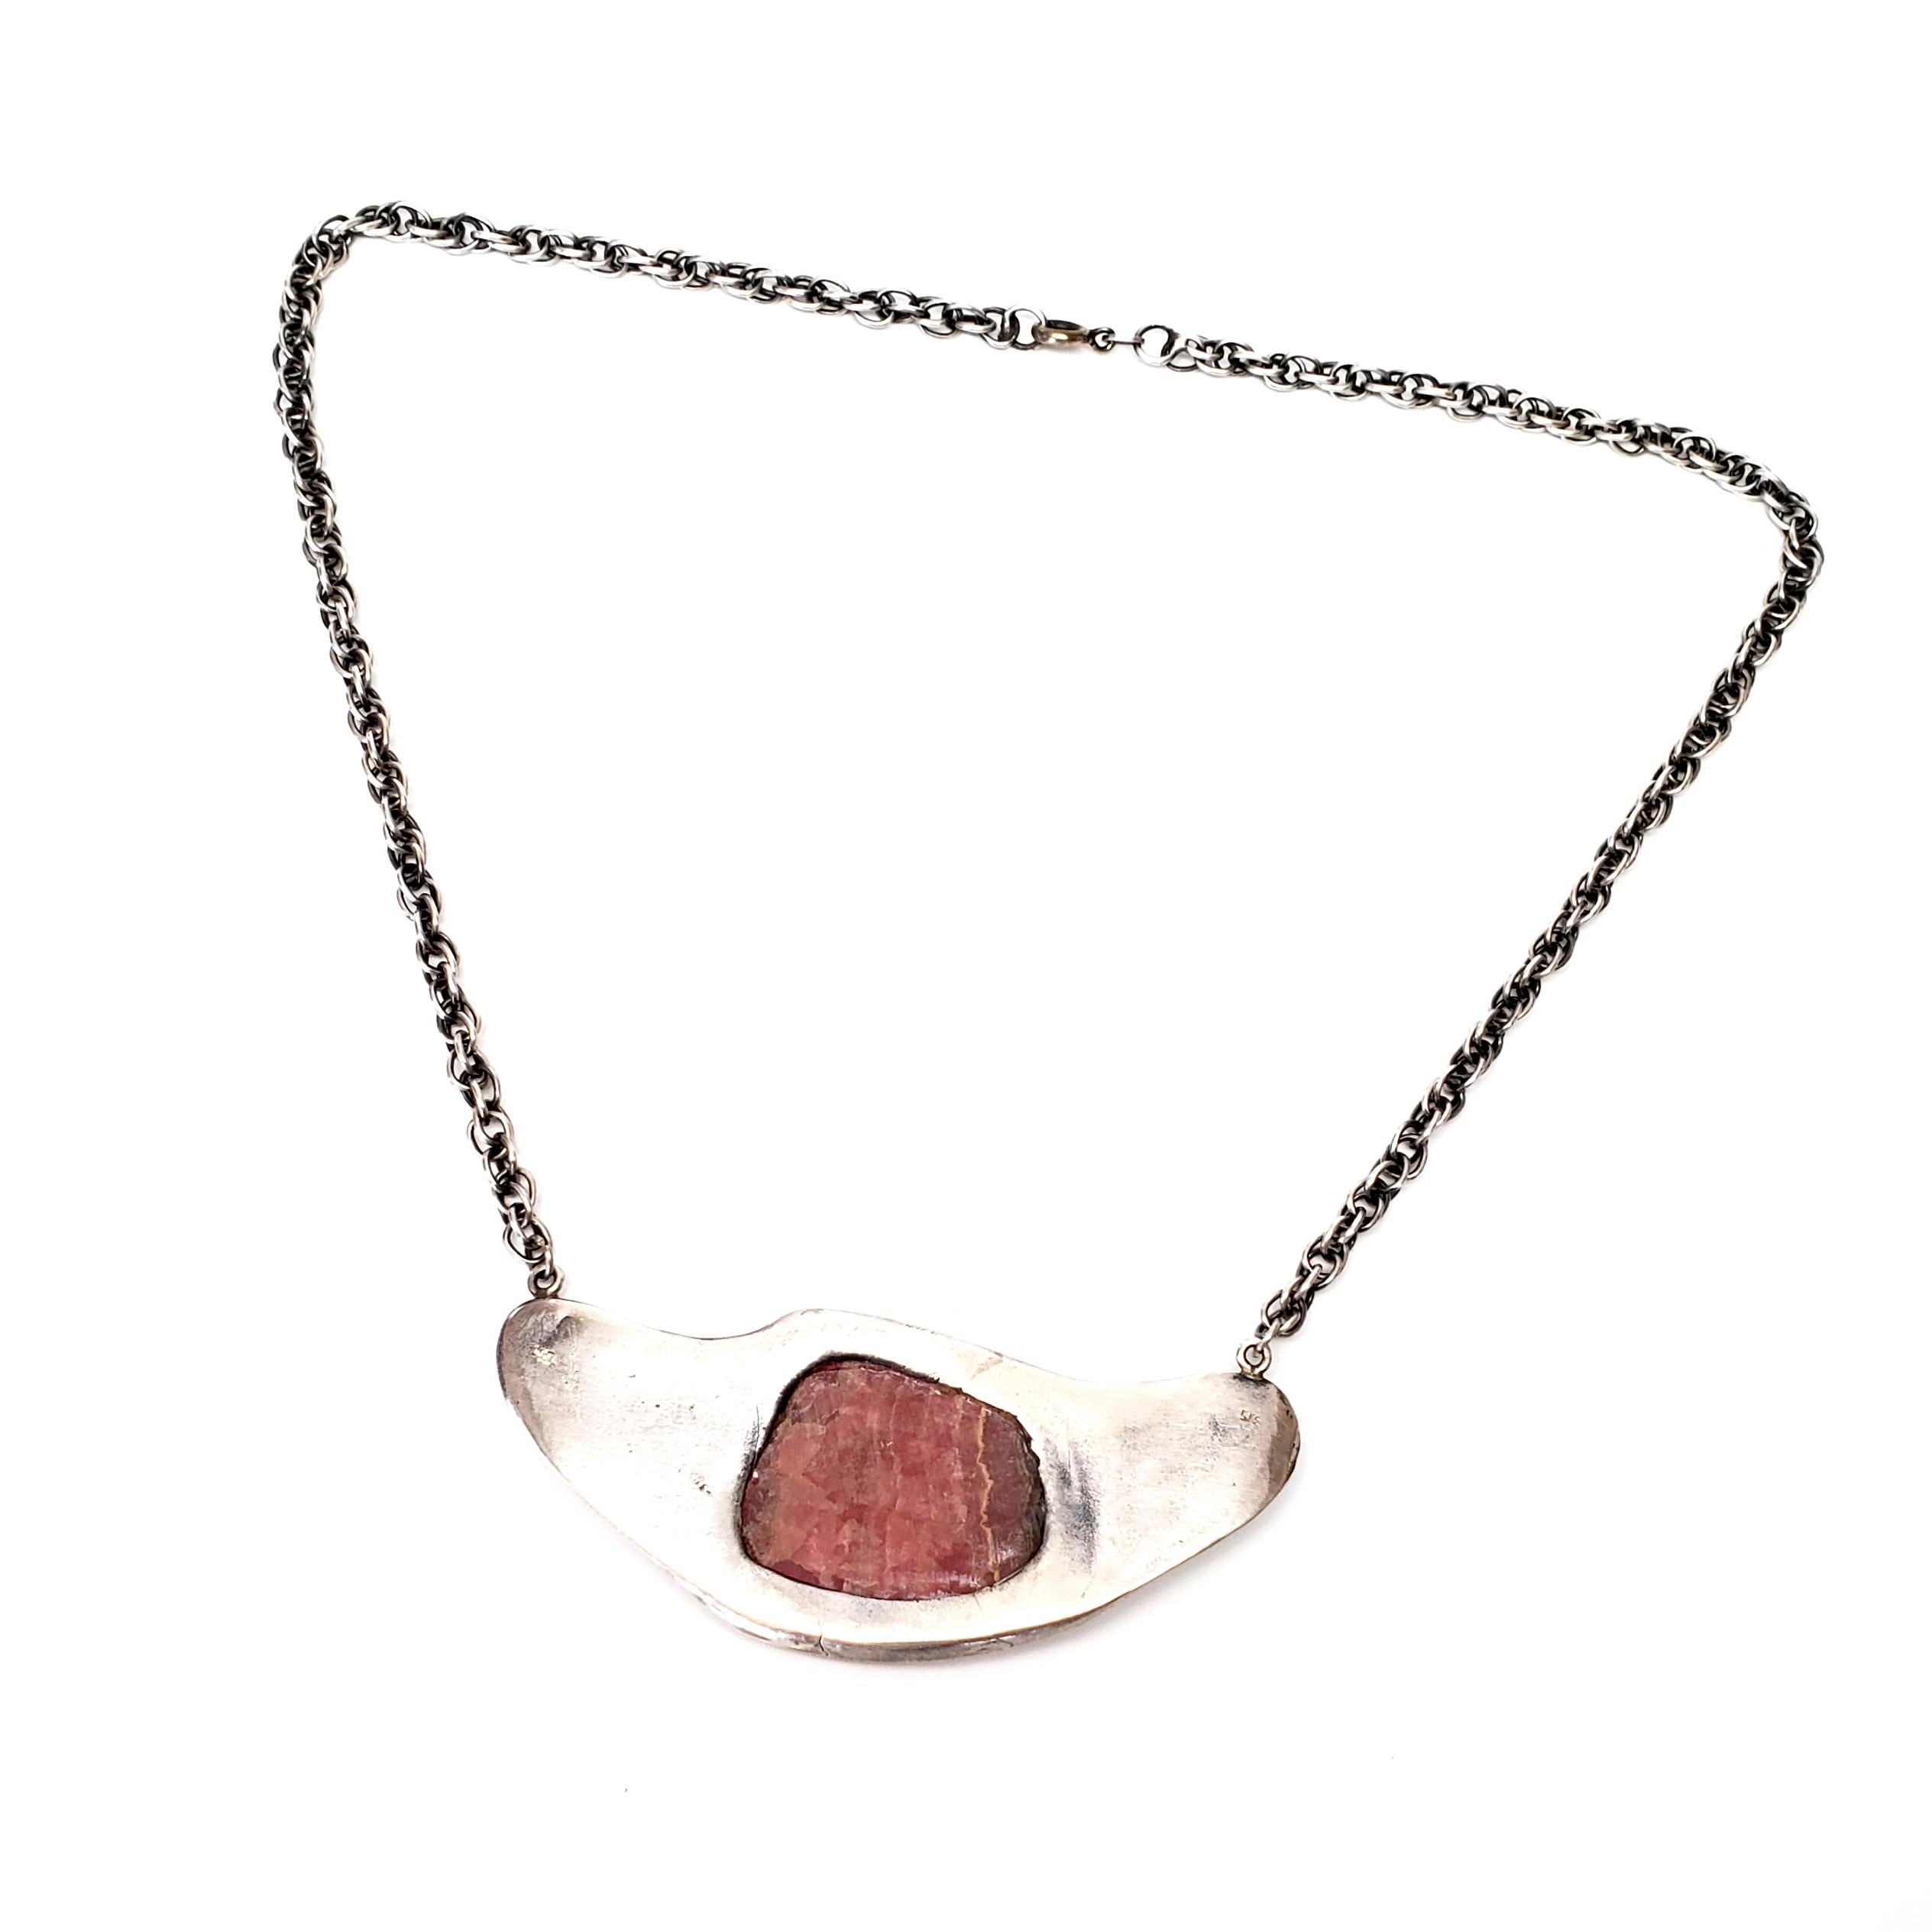 Sterling silver and pink rhodochrosite necklace.

Features a large banded pink rhodochrosite bezel set in a bib featuring a sunny pueblo and boat scene.

Measures approx 19 1/2